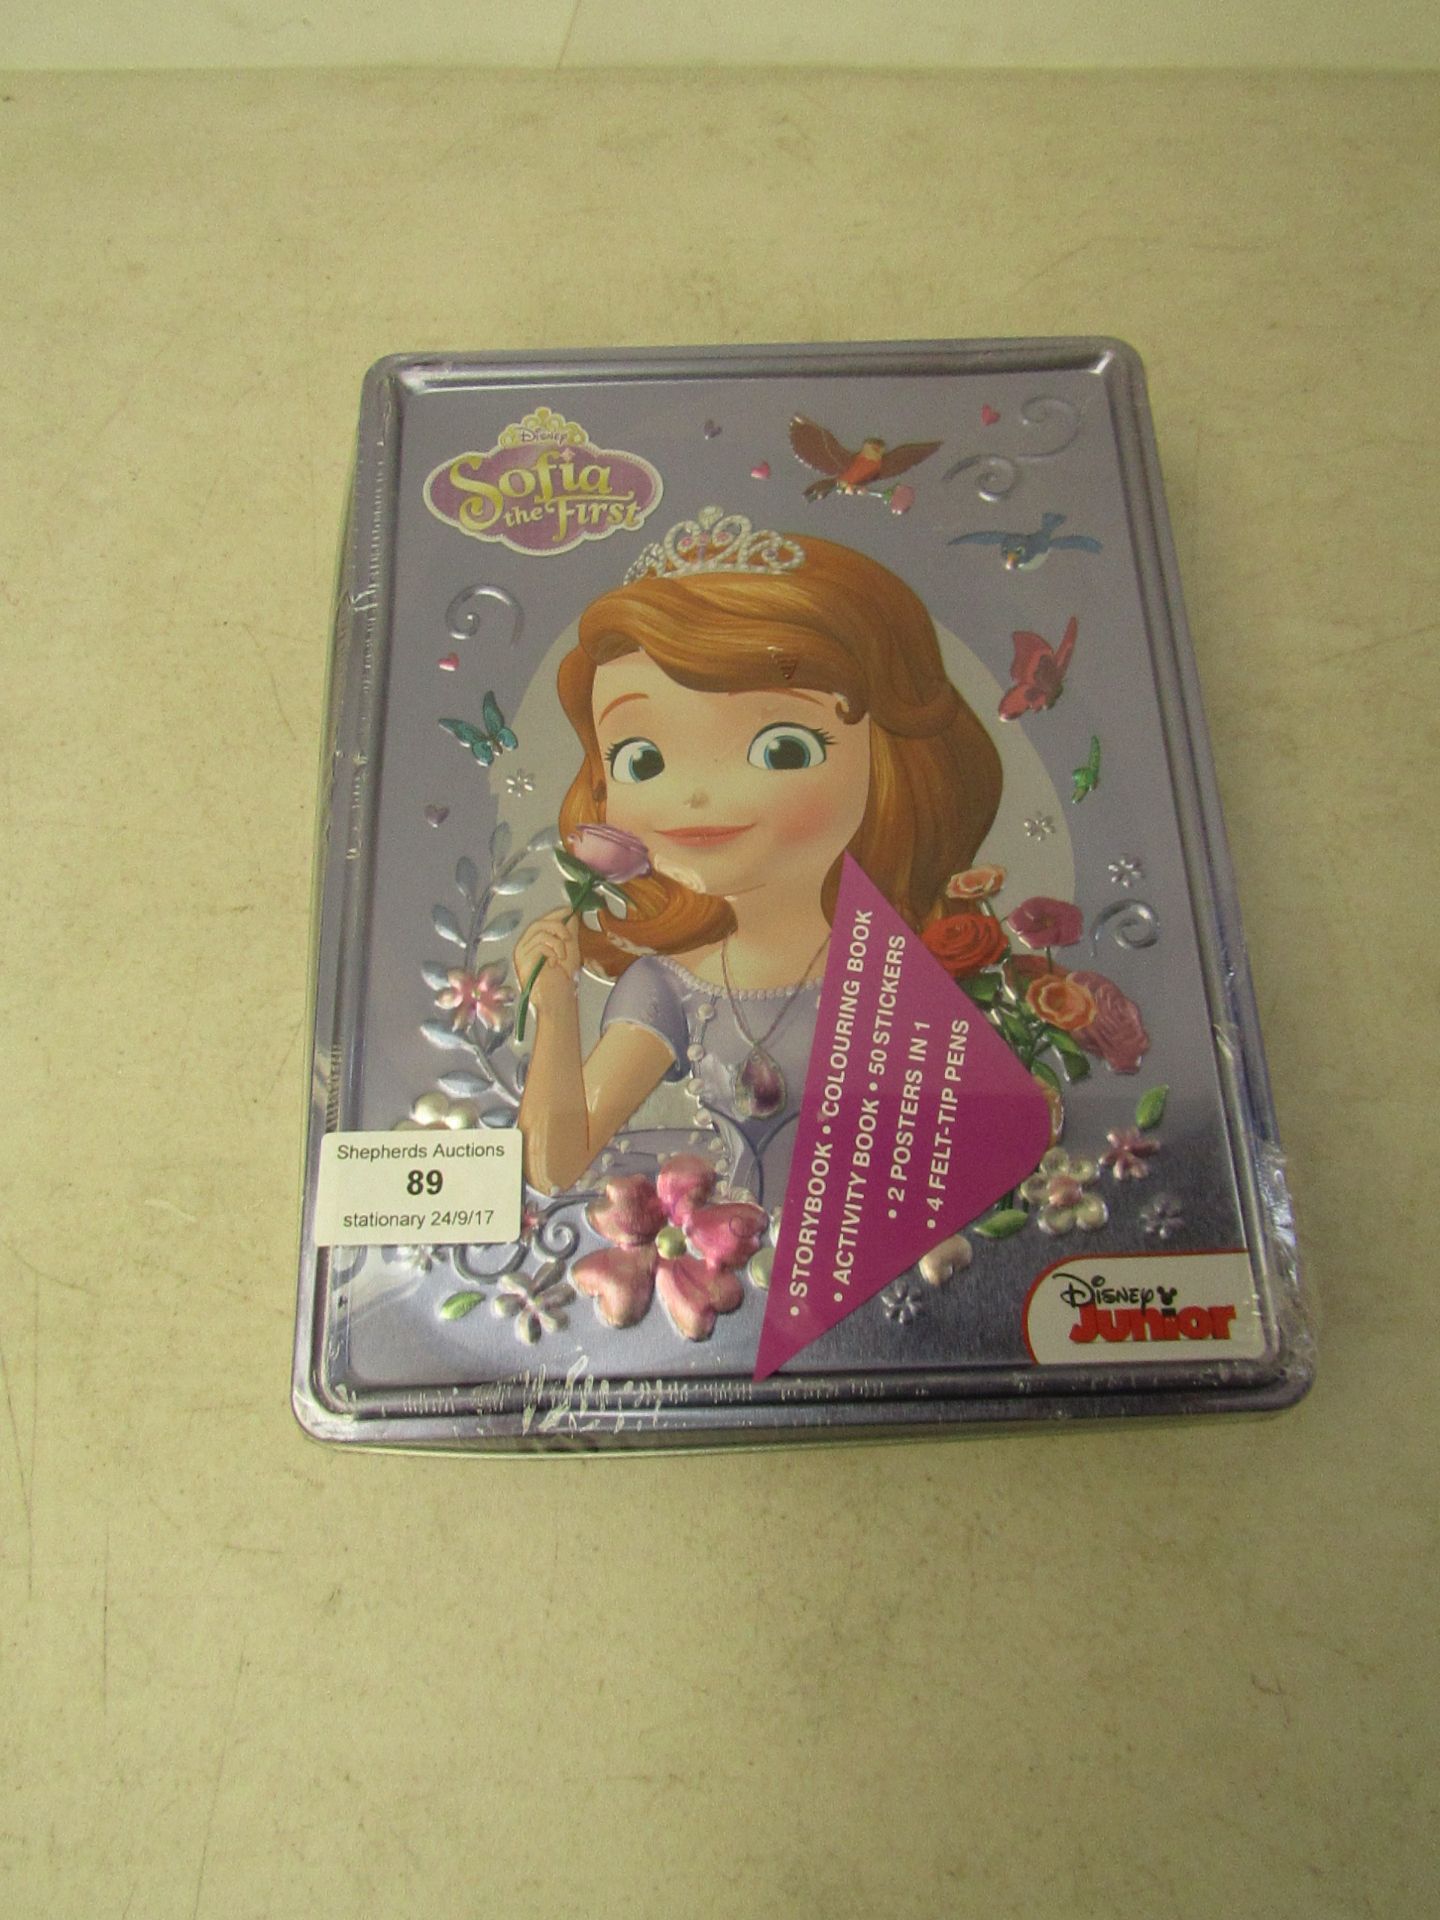 Sofia the first set includes 3 books, 4 felt tips, a Poster and stickers, all still sealed in the